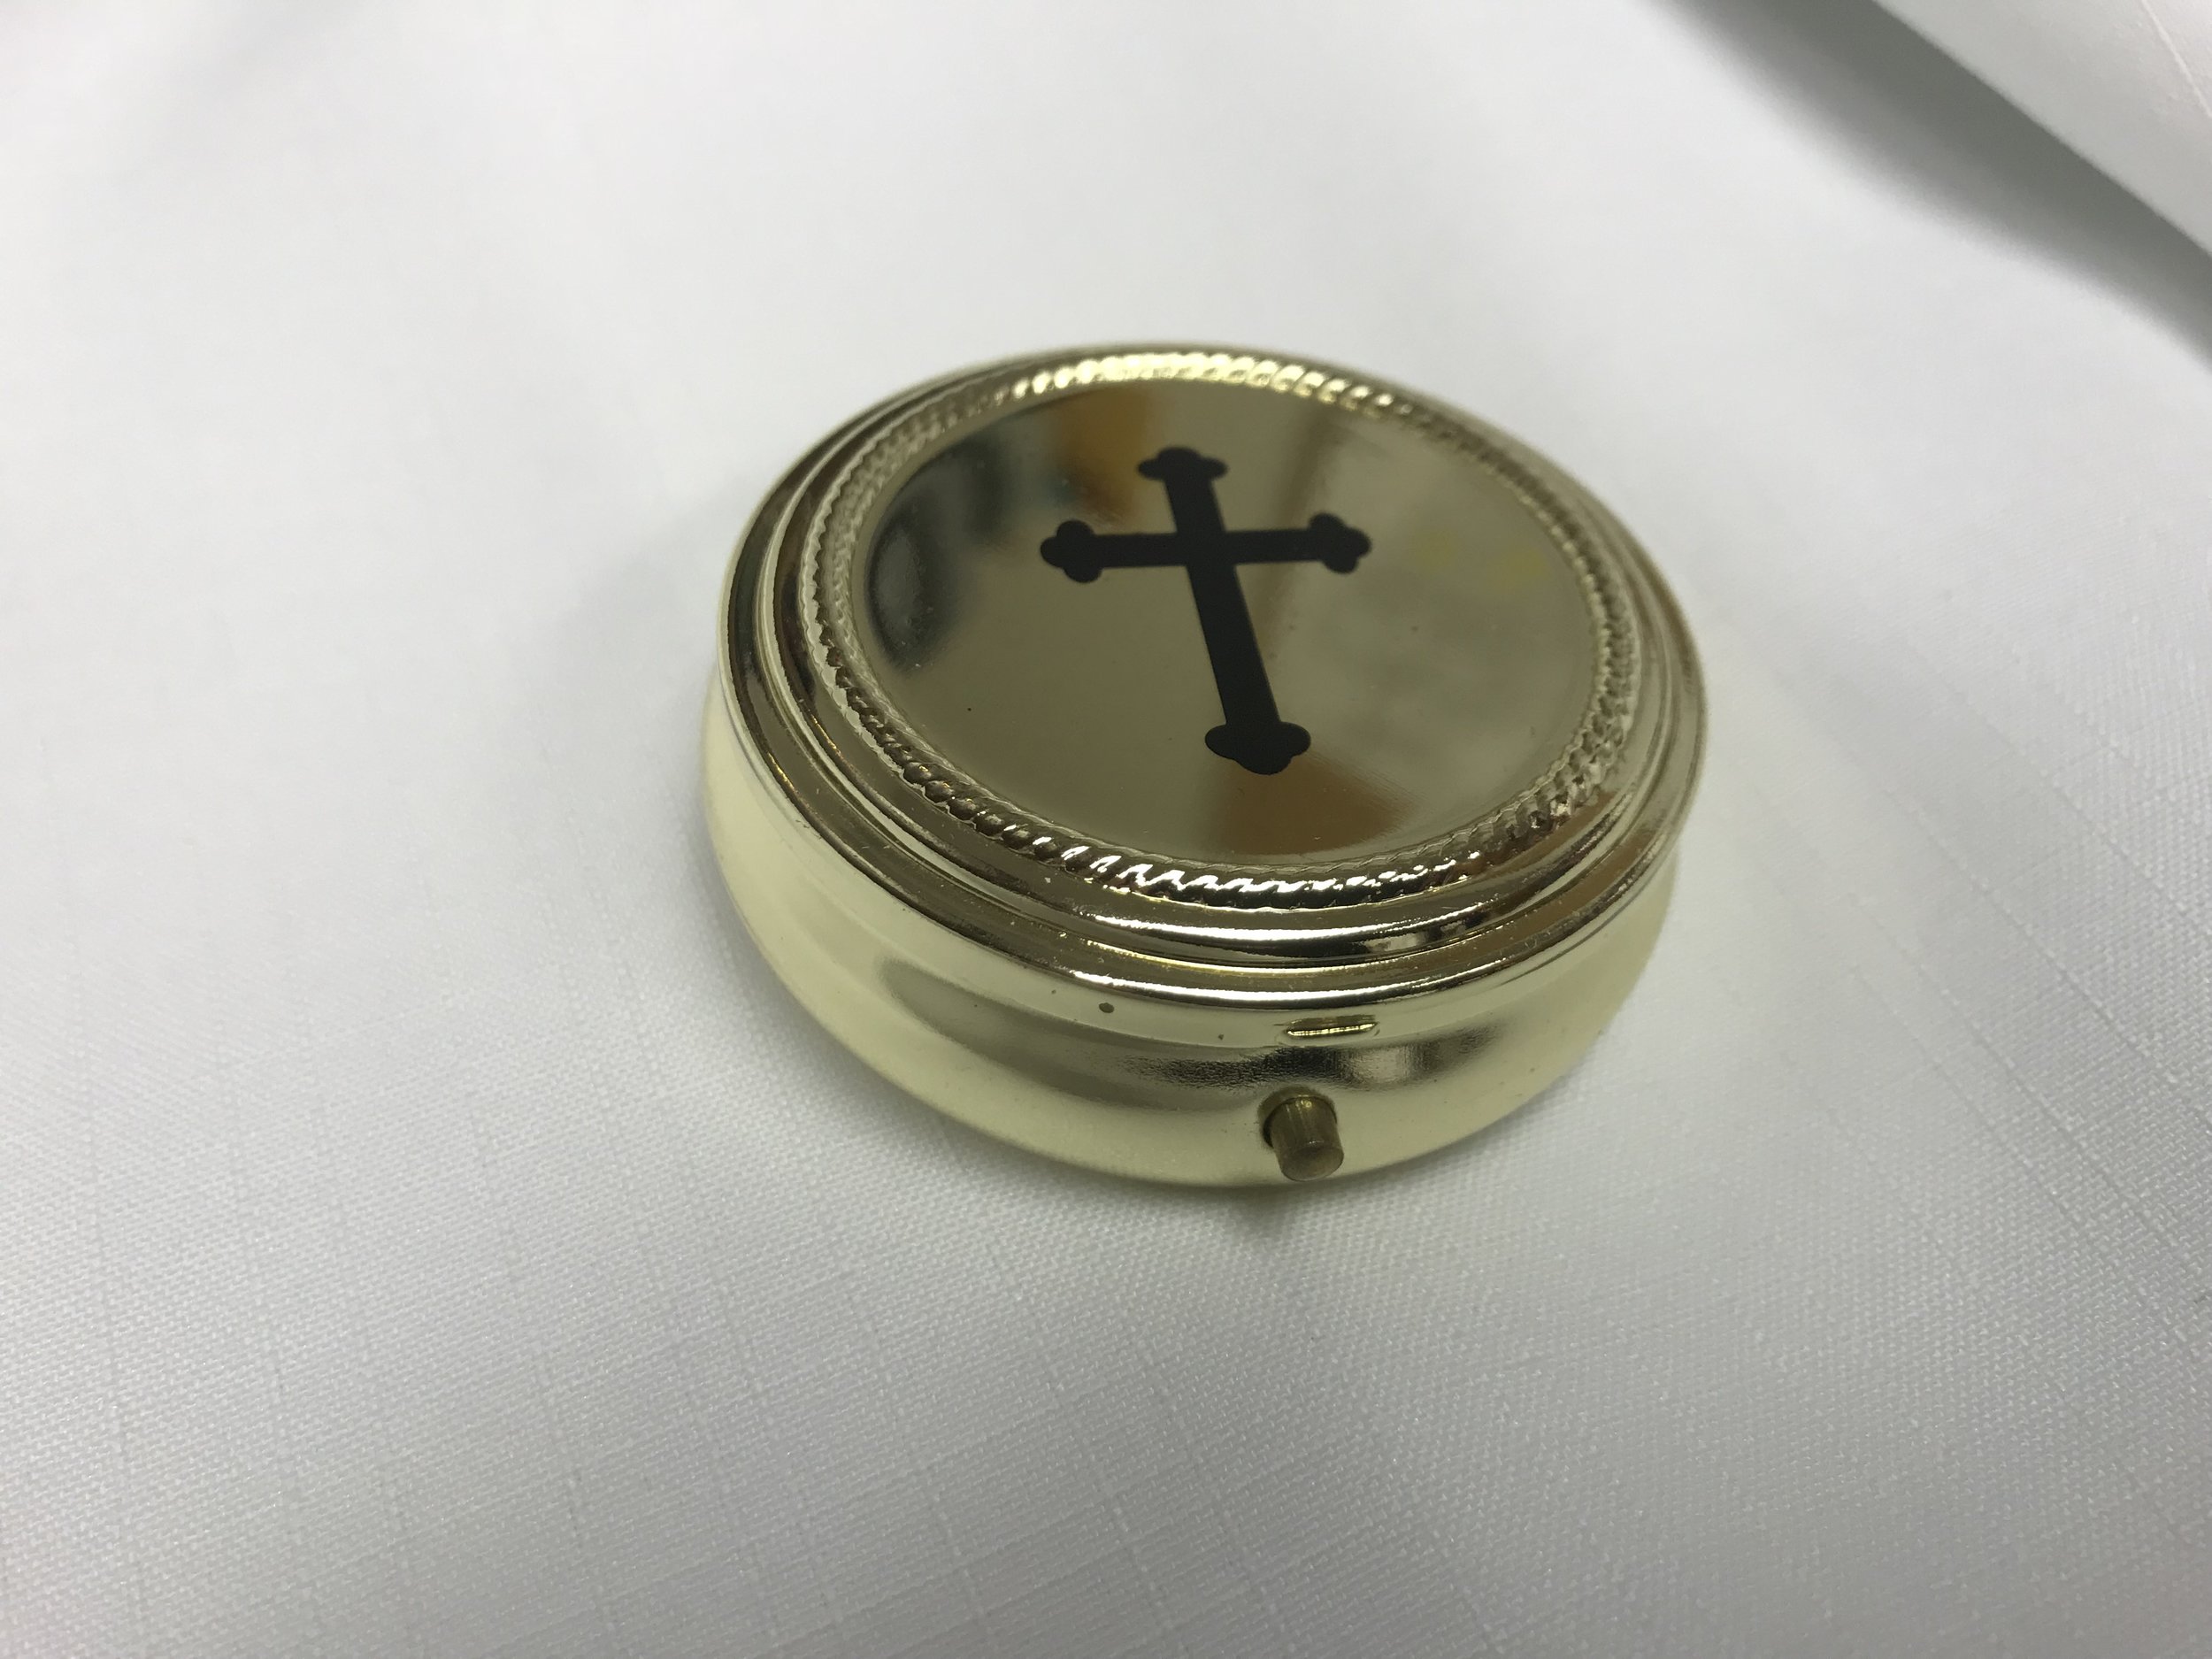 Open pyx that holds the Eucharist